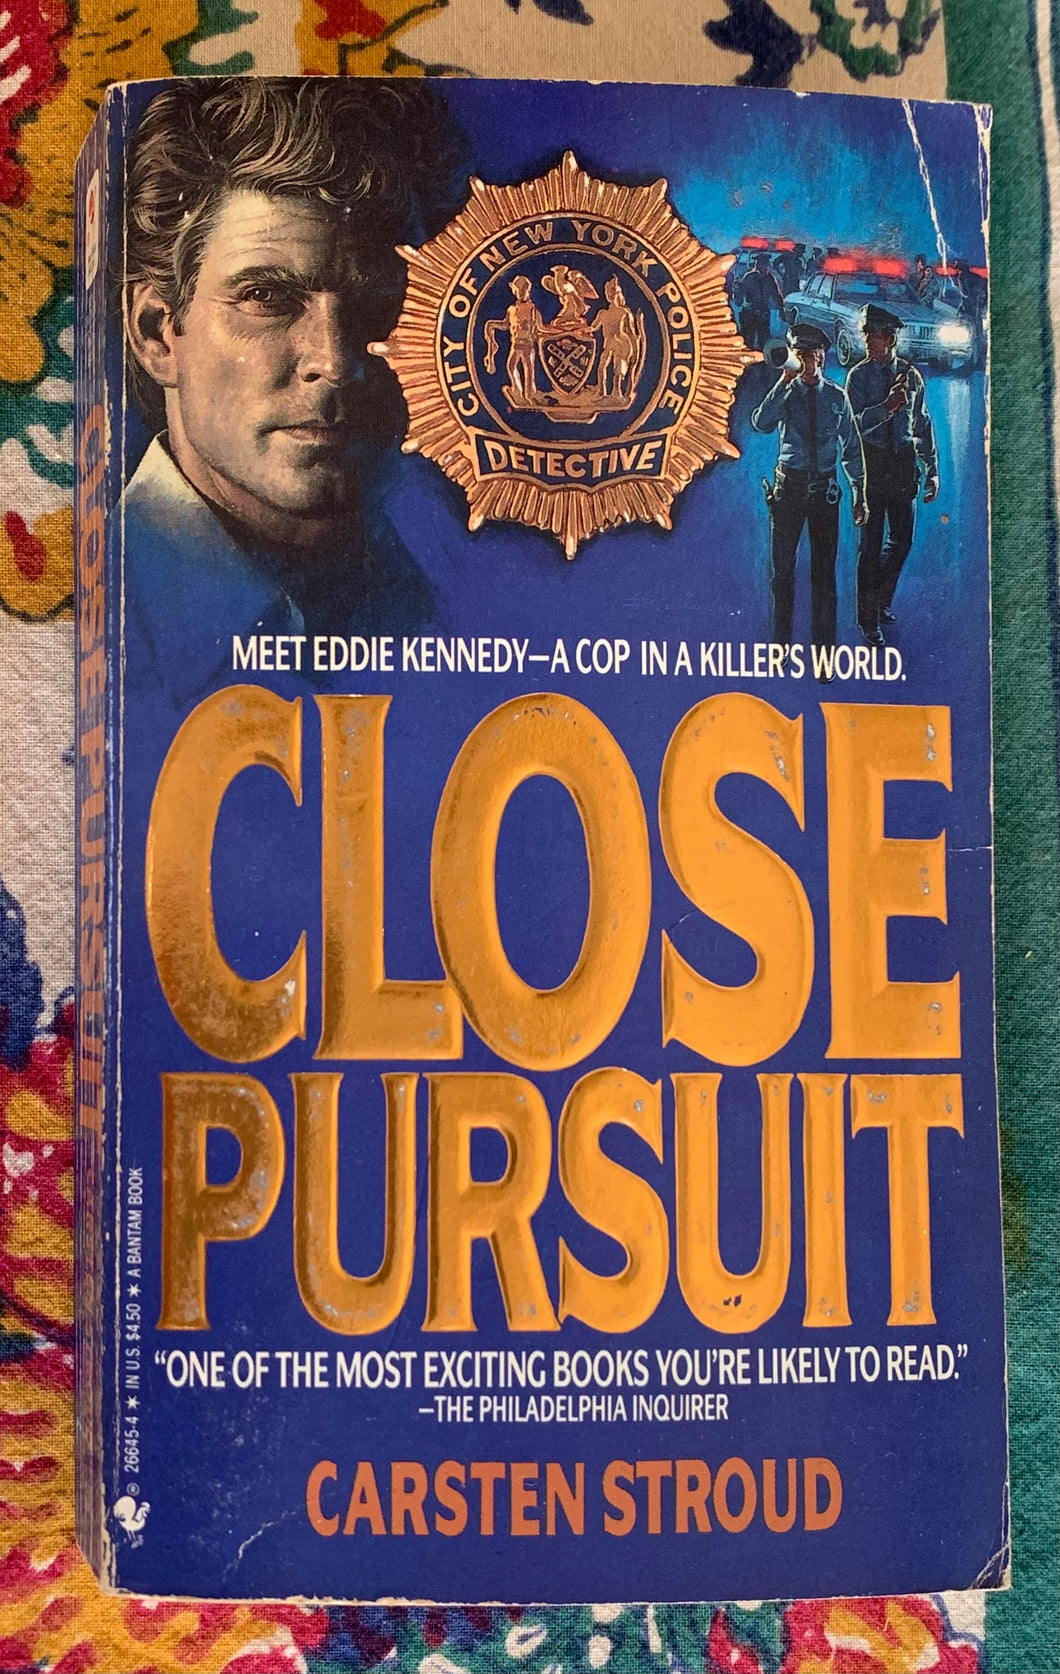 Close Pursuit: A Week in the Life of an NYPD Homicide Cop